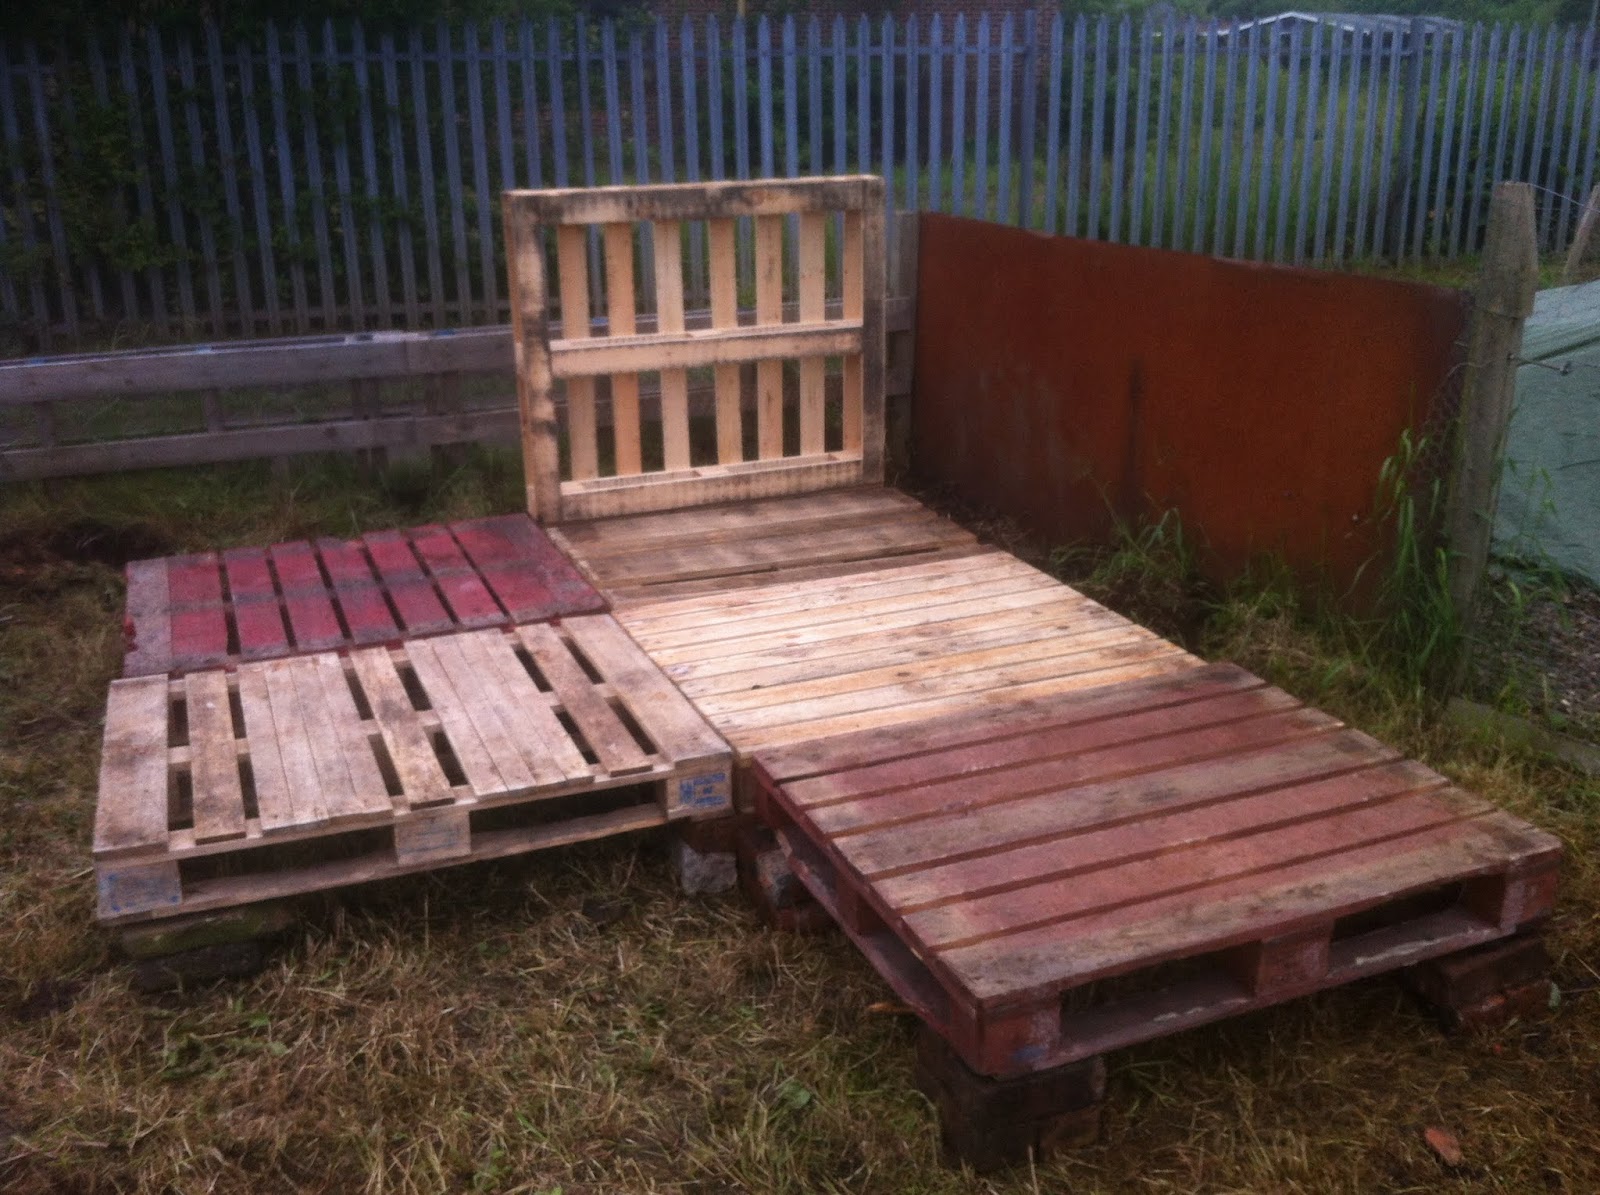 My Dad did manage to get me some big heavy duty pallets for the base 